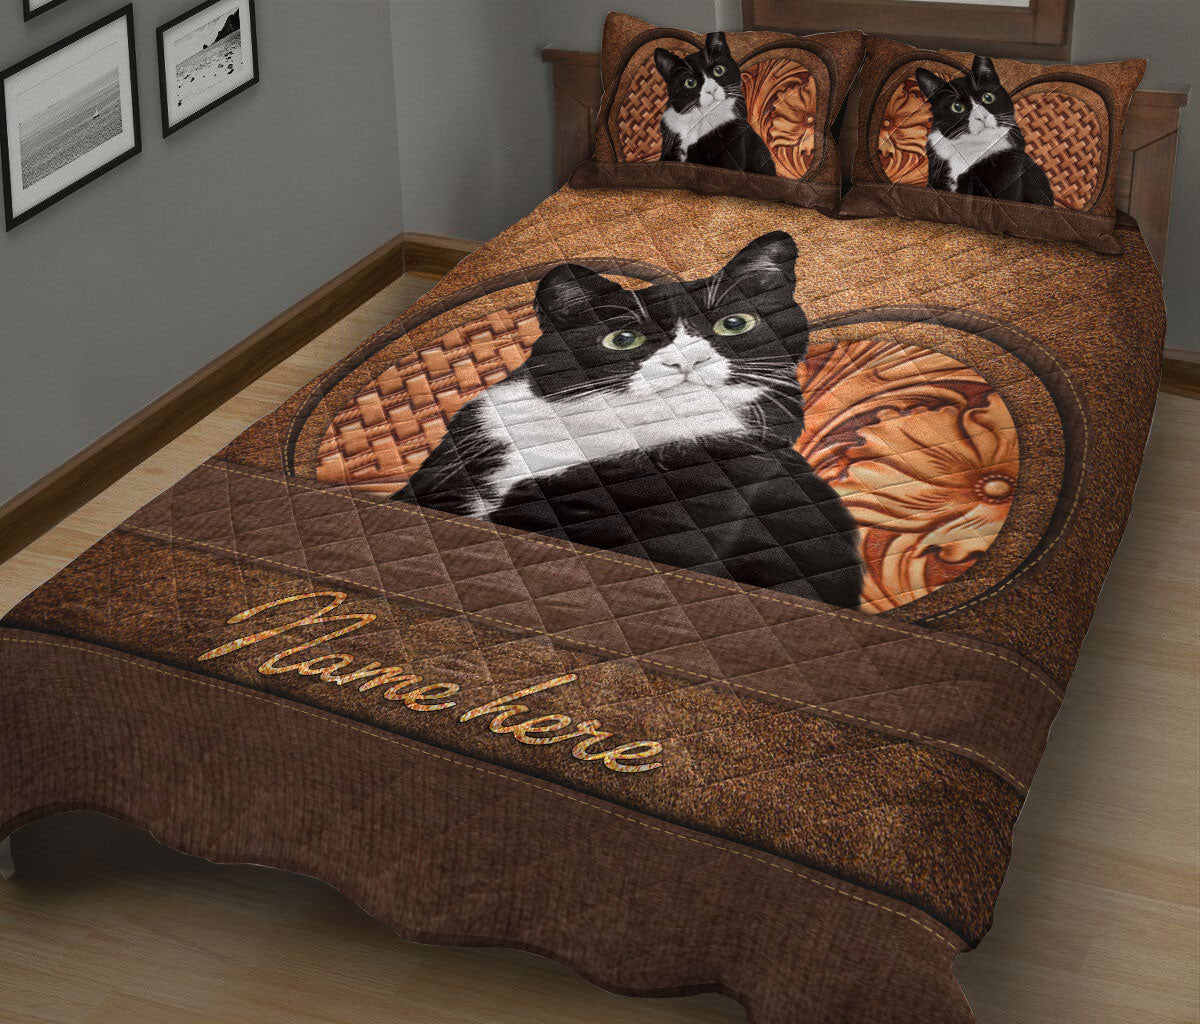 Ohaprints-Quilt-Bed-Set-Pillowcase-Tuxedo-Cat-Bicolor-Cat-Animal-Pet-Lover-Vintage-Brown-Custom-Personalized-Name-Blanket-Bedspread-Bedding-218-King (90'' x 100'')